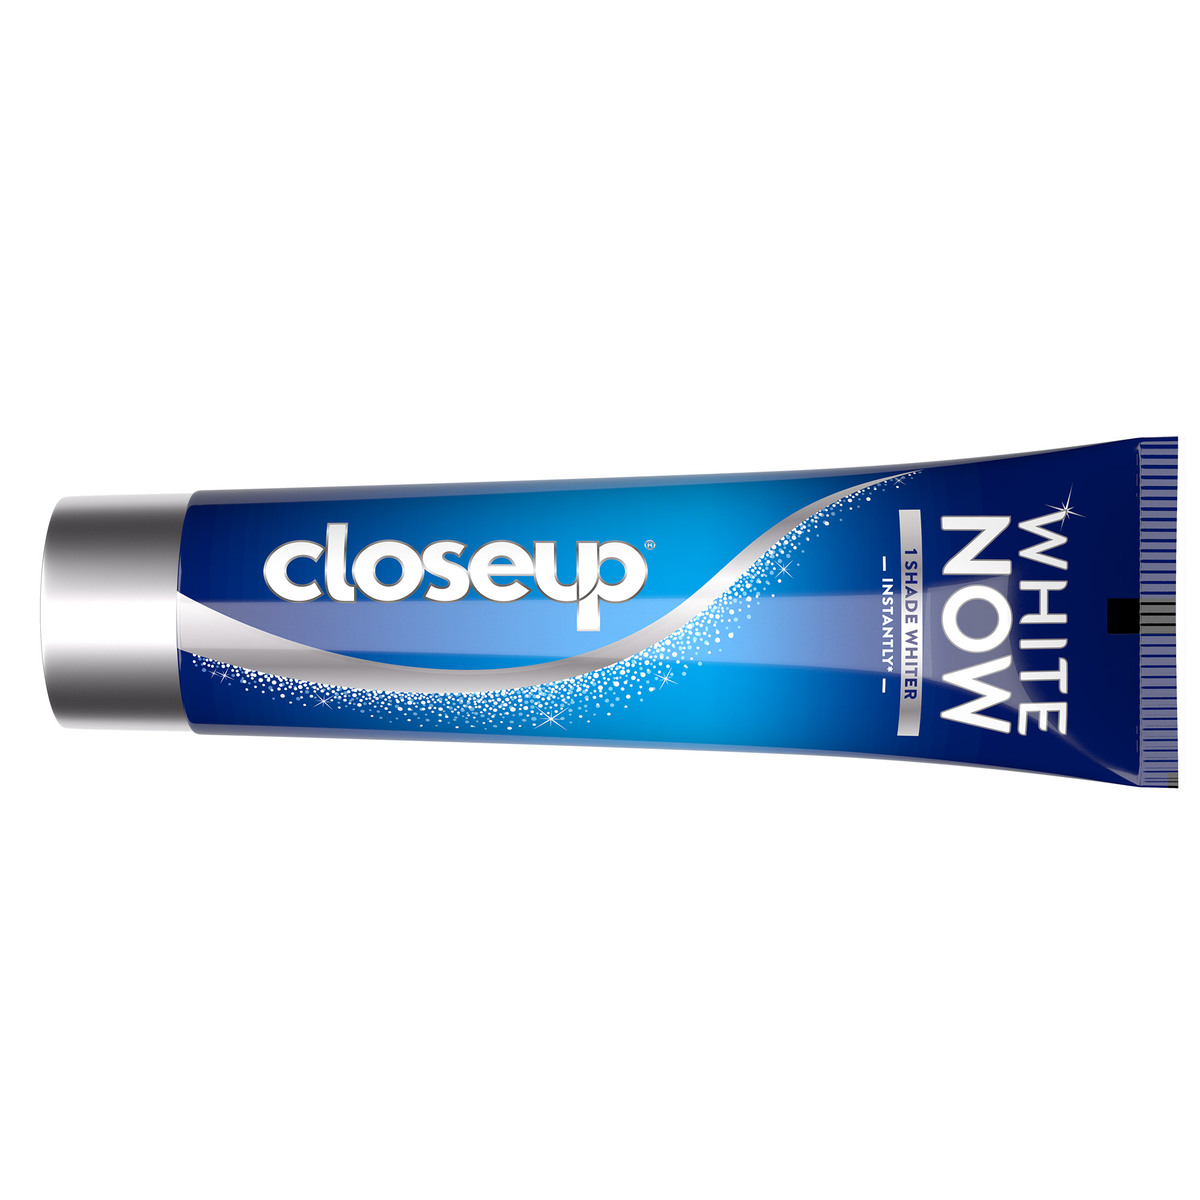 Close Up White Now Instant Whitening Toothpaste Original 75ml Online At Best Price Tooth Paste 3583